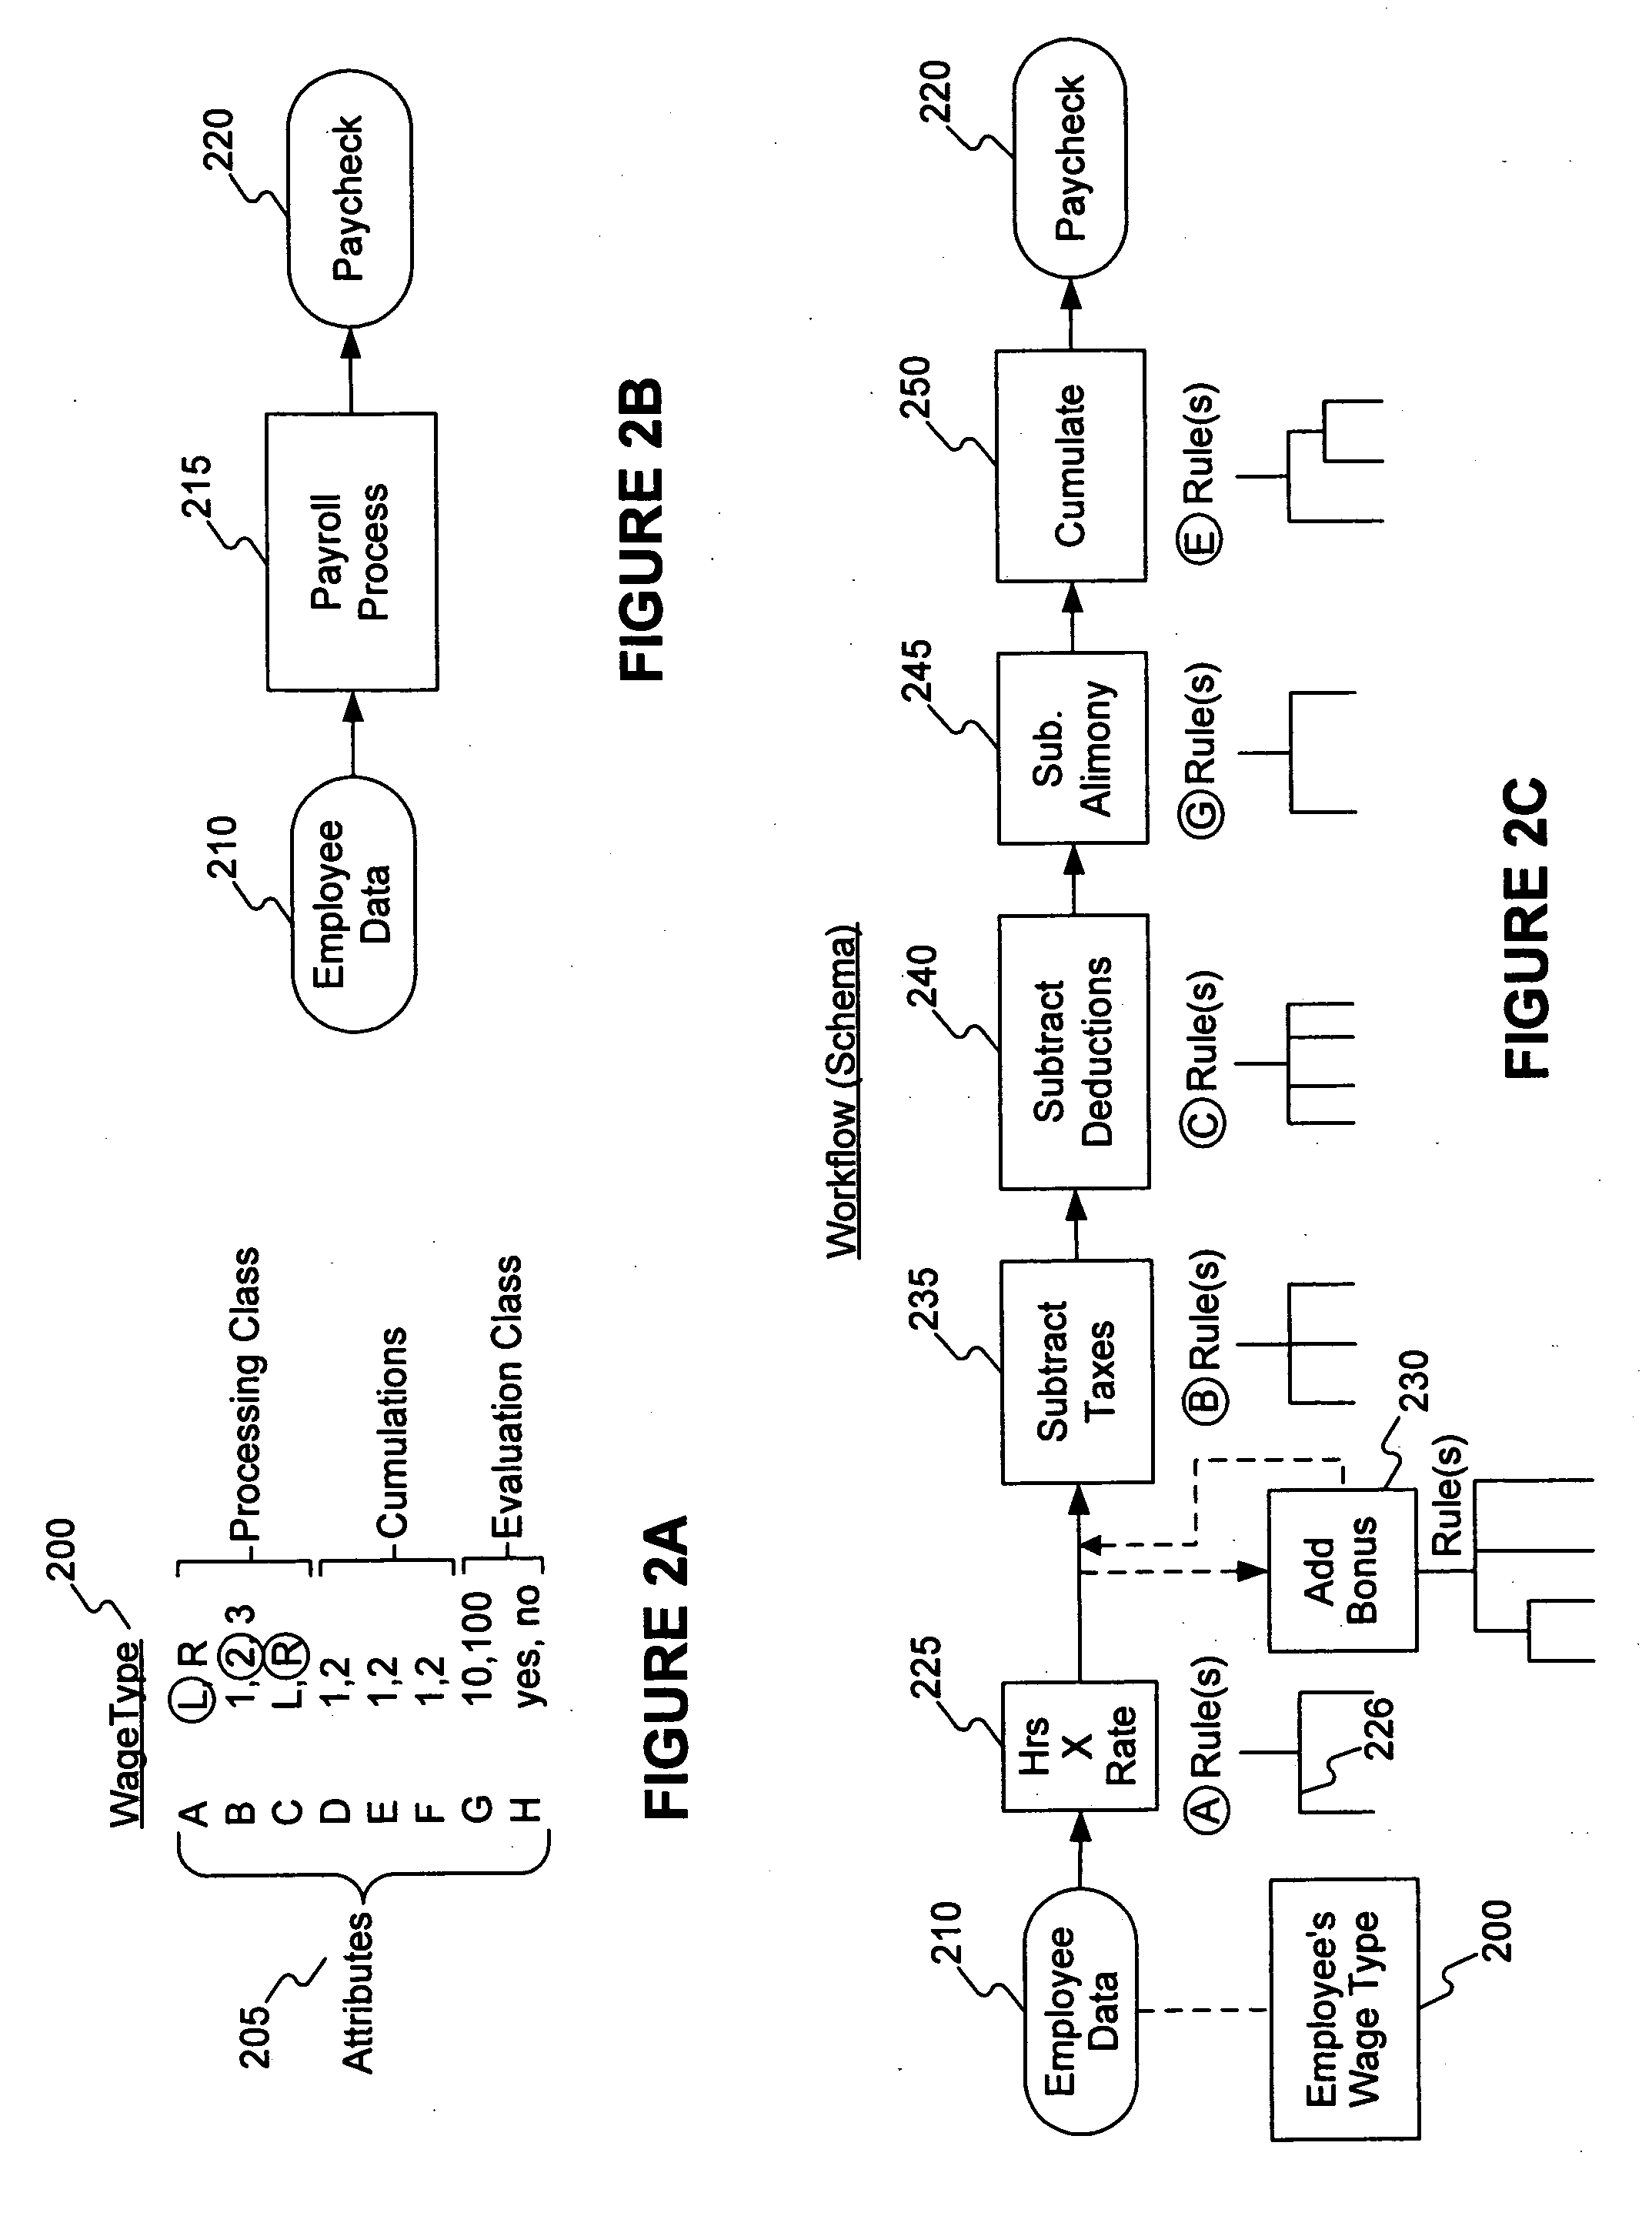 Methods of optimizing legacy application layer control structure using refactoring